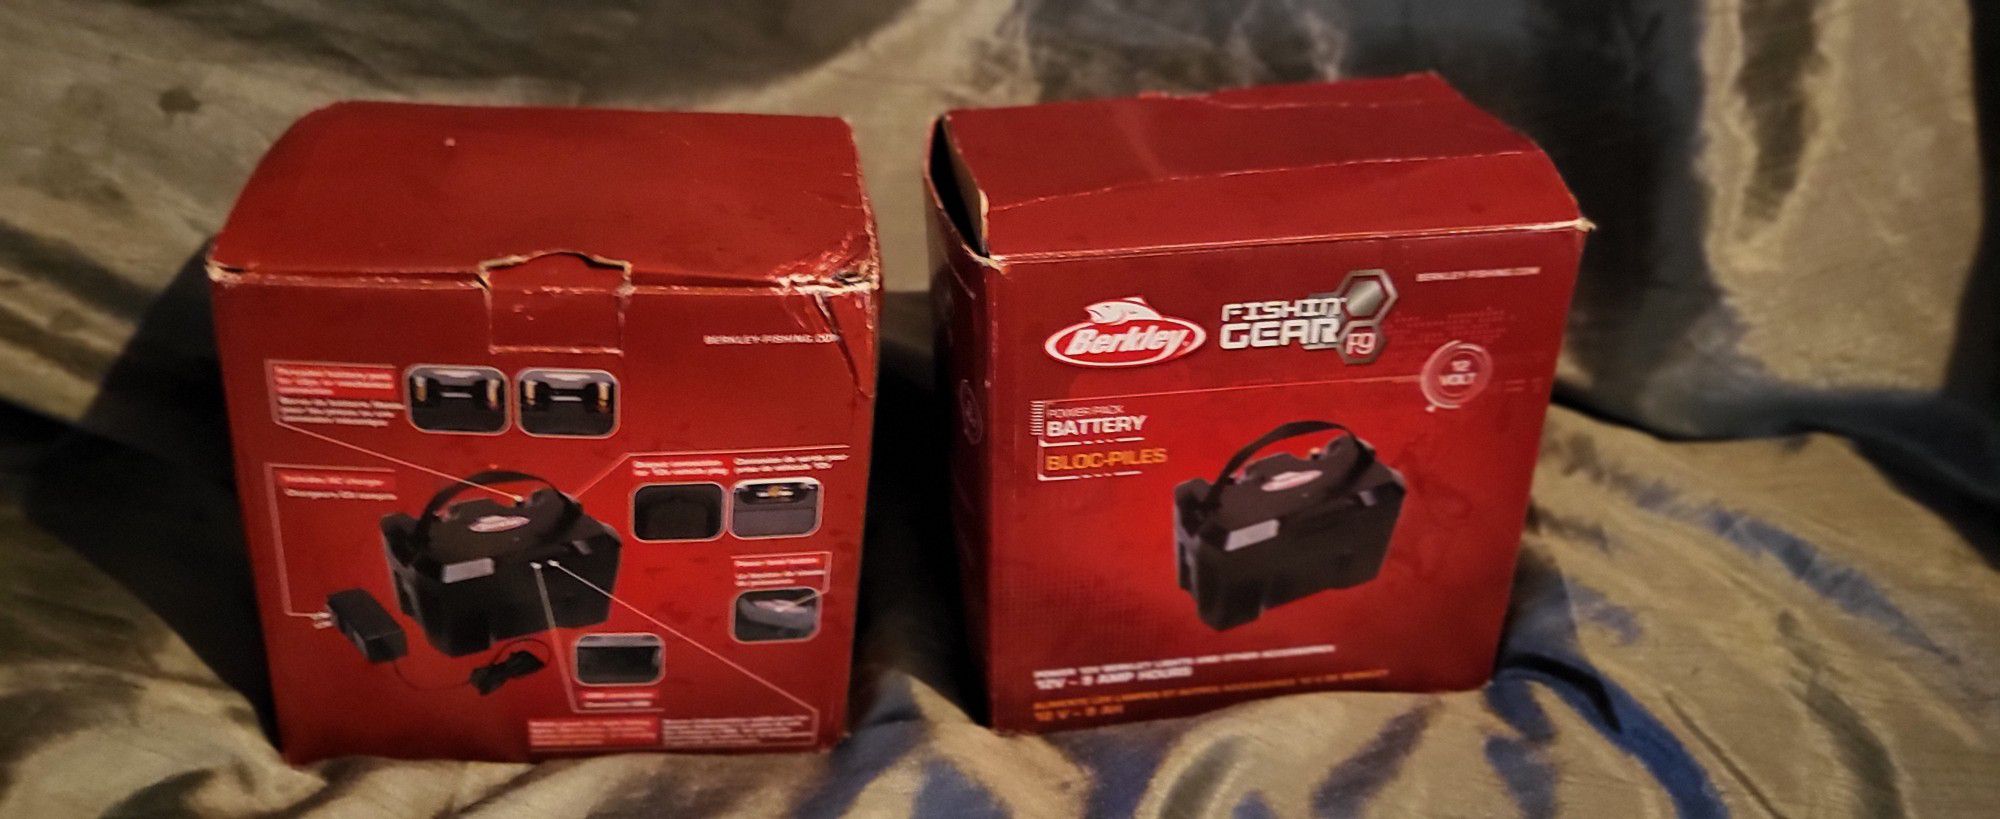 Two New Berkley 12v Battery Power Packs With AC Adapter 